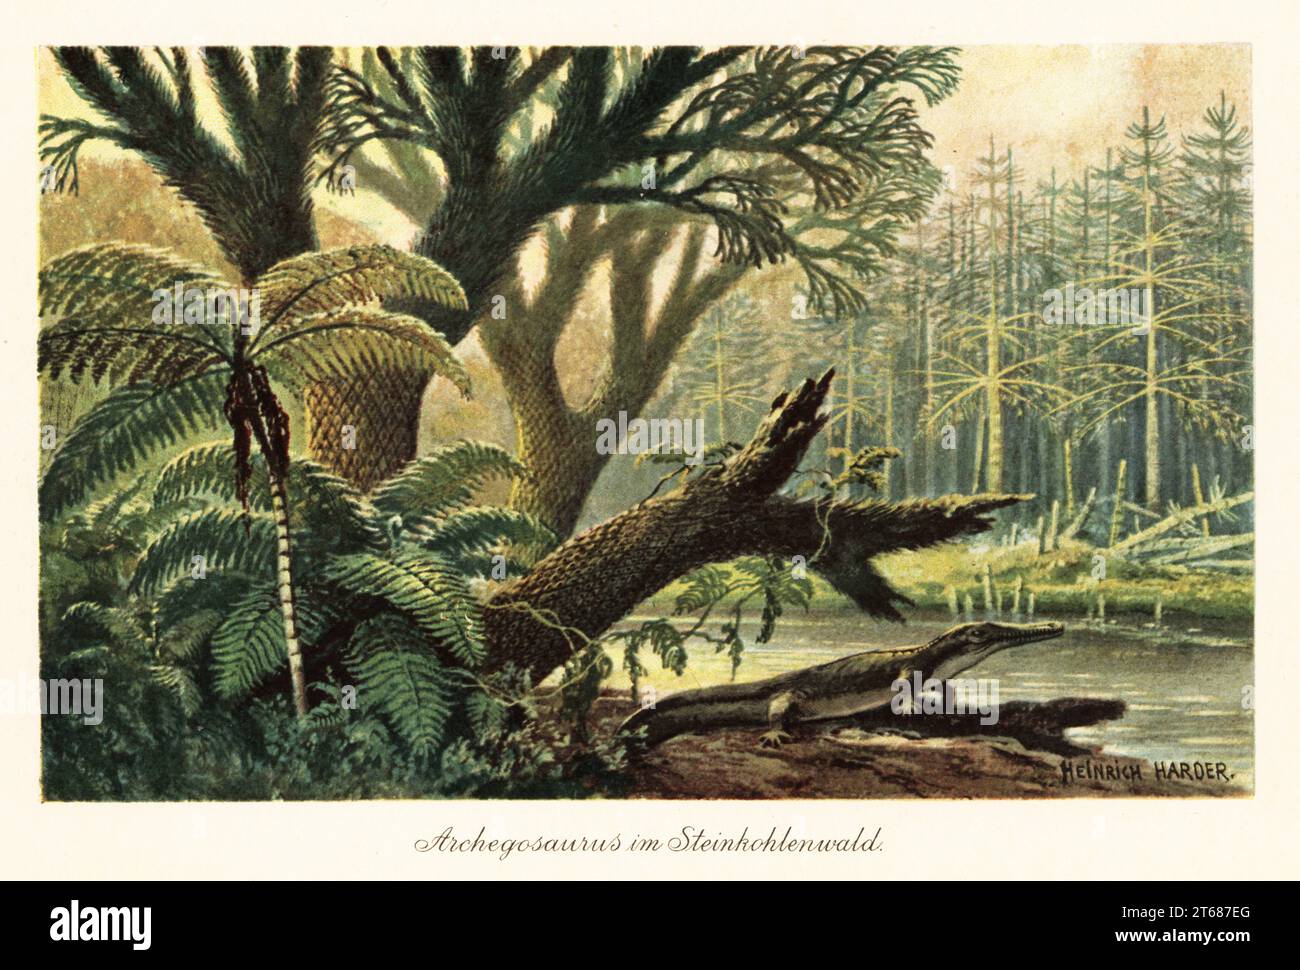 Archegosaurus decheni by a river bank in a tropical primordial jungle of ferns and pines. Archegosaurus is a genus of temnospondyl amphibian, Asselian to Wuchiapingian stages of the Permian. Archegosaurus im Steinkohlenwald. Colour printed illustration by Heinrich Harder from Wilhelm Bolsches Tiere der Urwelt (Animals of the Prehistoric World), Reichardt Cocoa company, Hamburg, 1908. Heinrich Harder (1858-1935) was a German landscape artist and book illustrator. Stock Photo